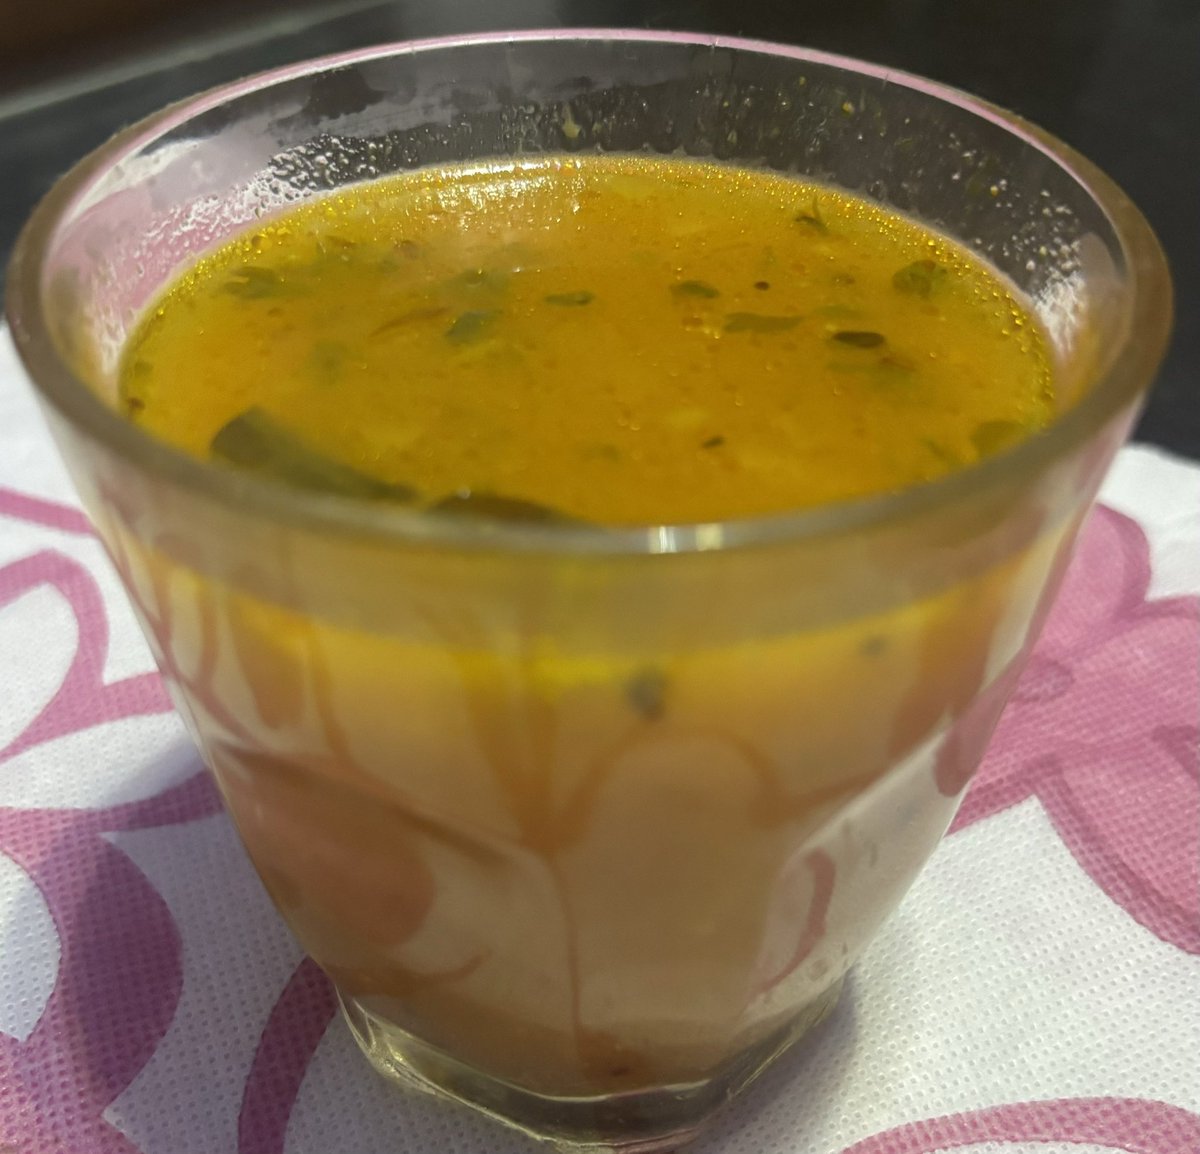 Rasam is the greatest non-alcoholic beverage ever. Transcends Class, Caste or Religion in my region!